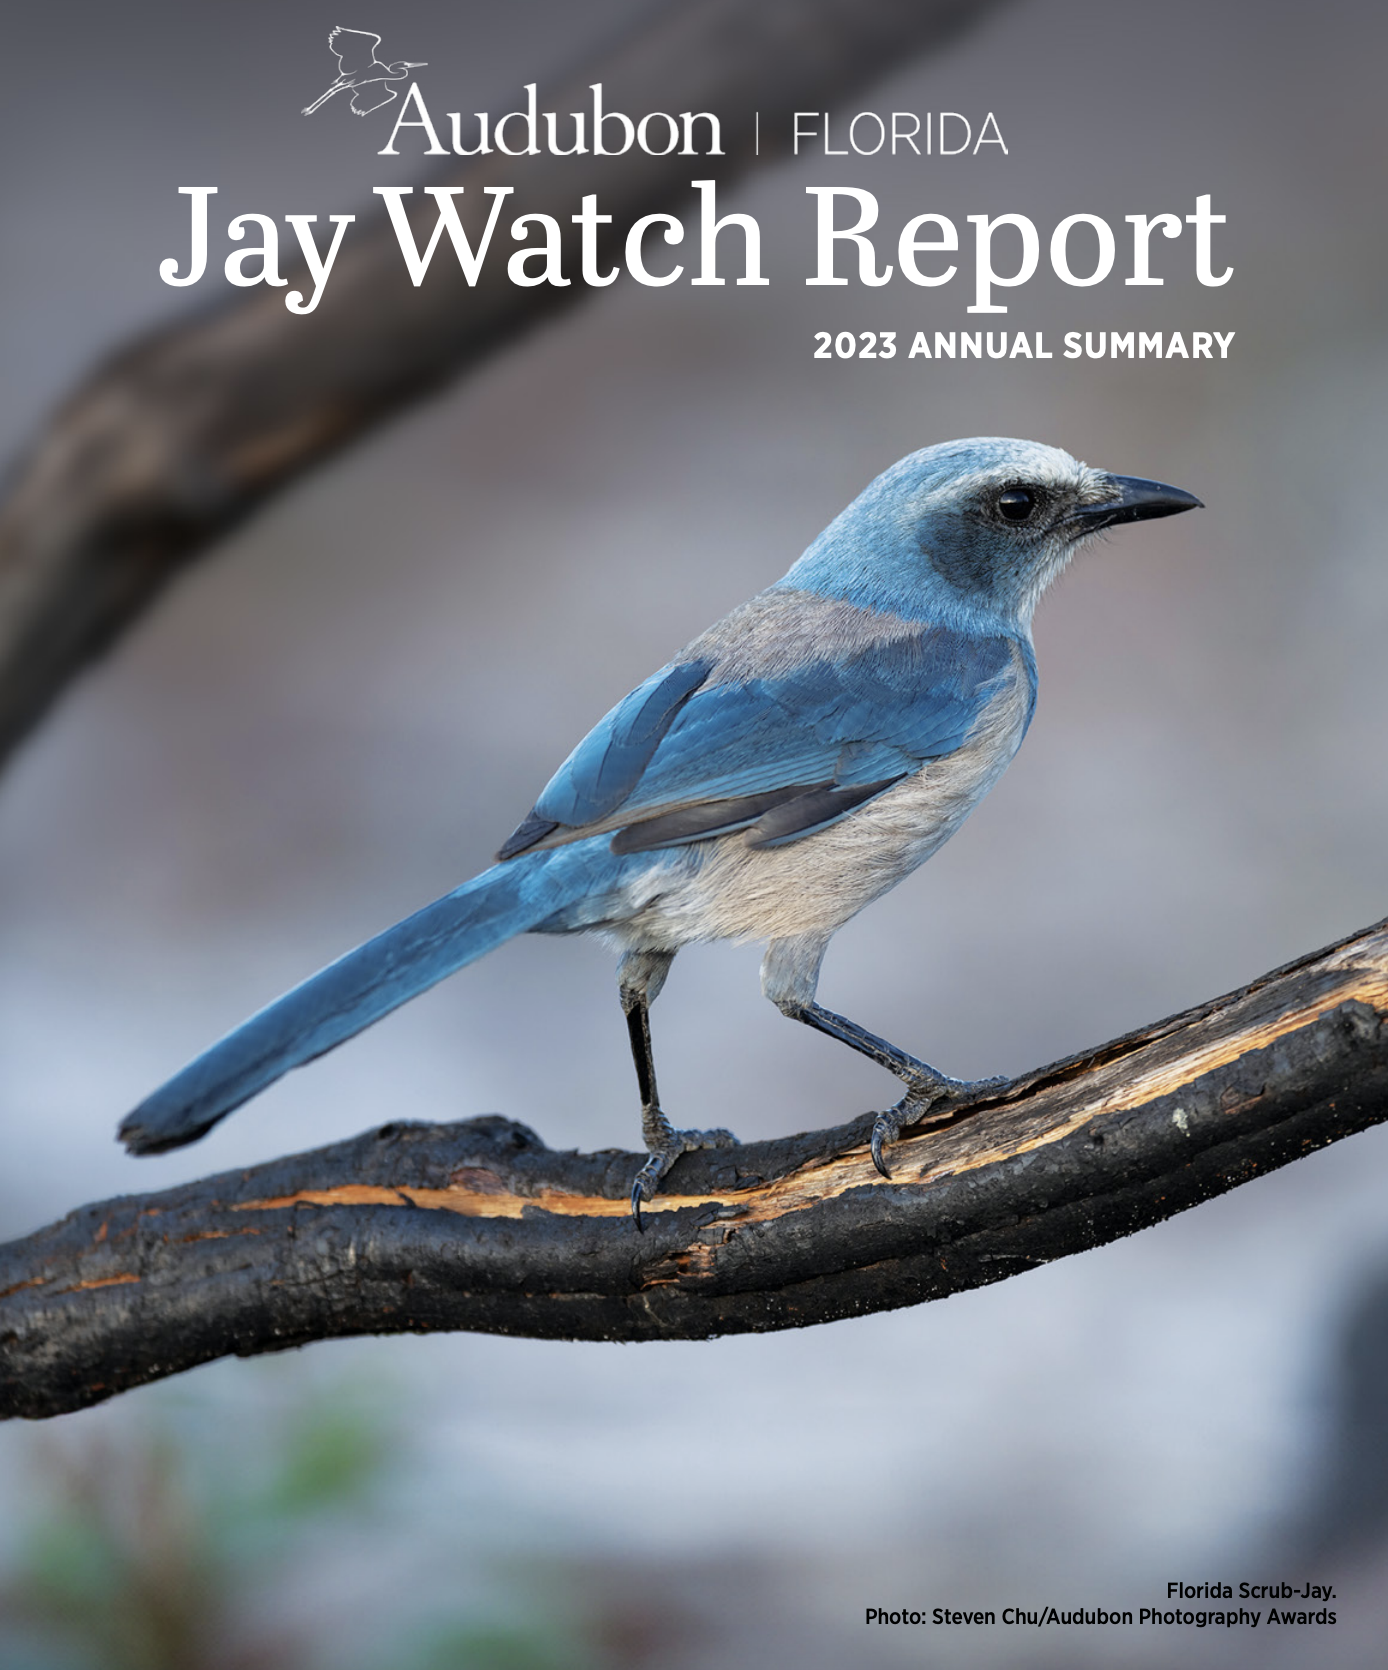 The cover of the Jay Watch Report, featuring a blue and gray Florida Scrub-Jay perched on a branch.